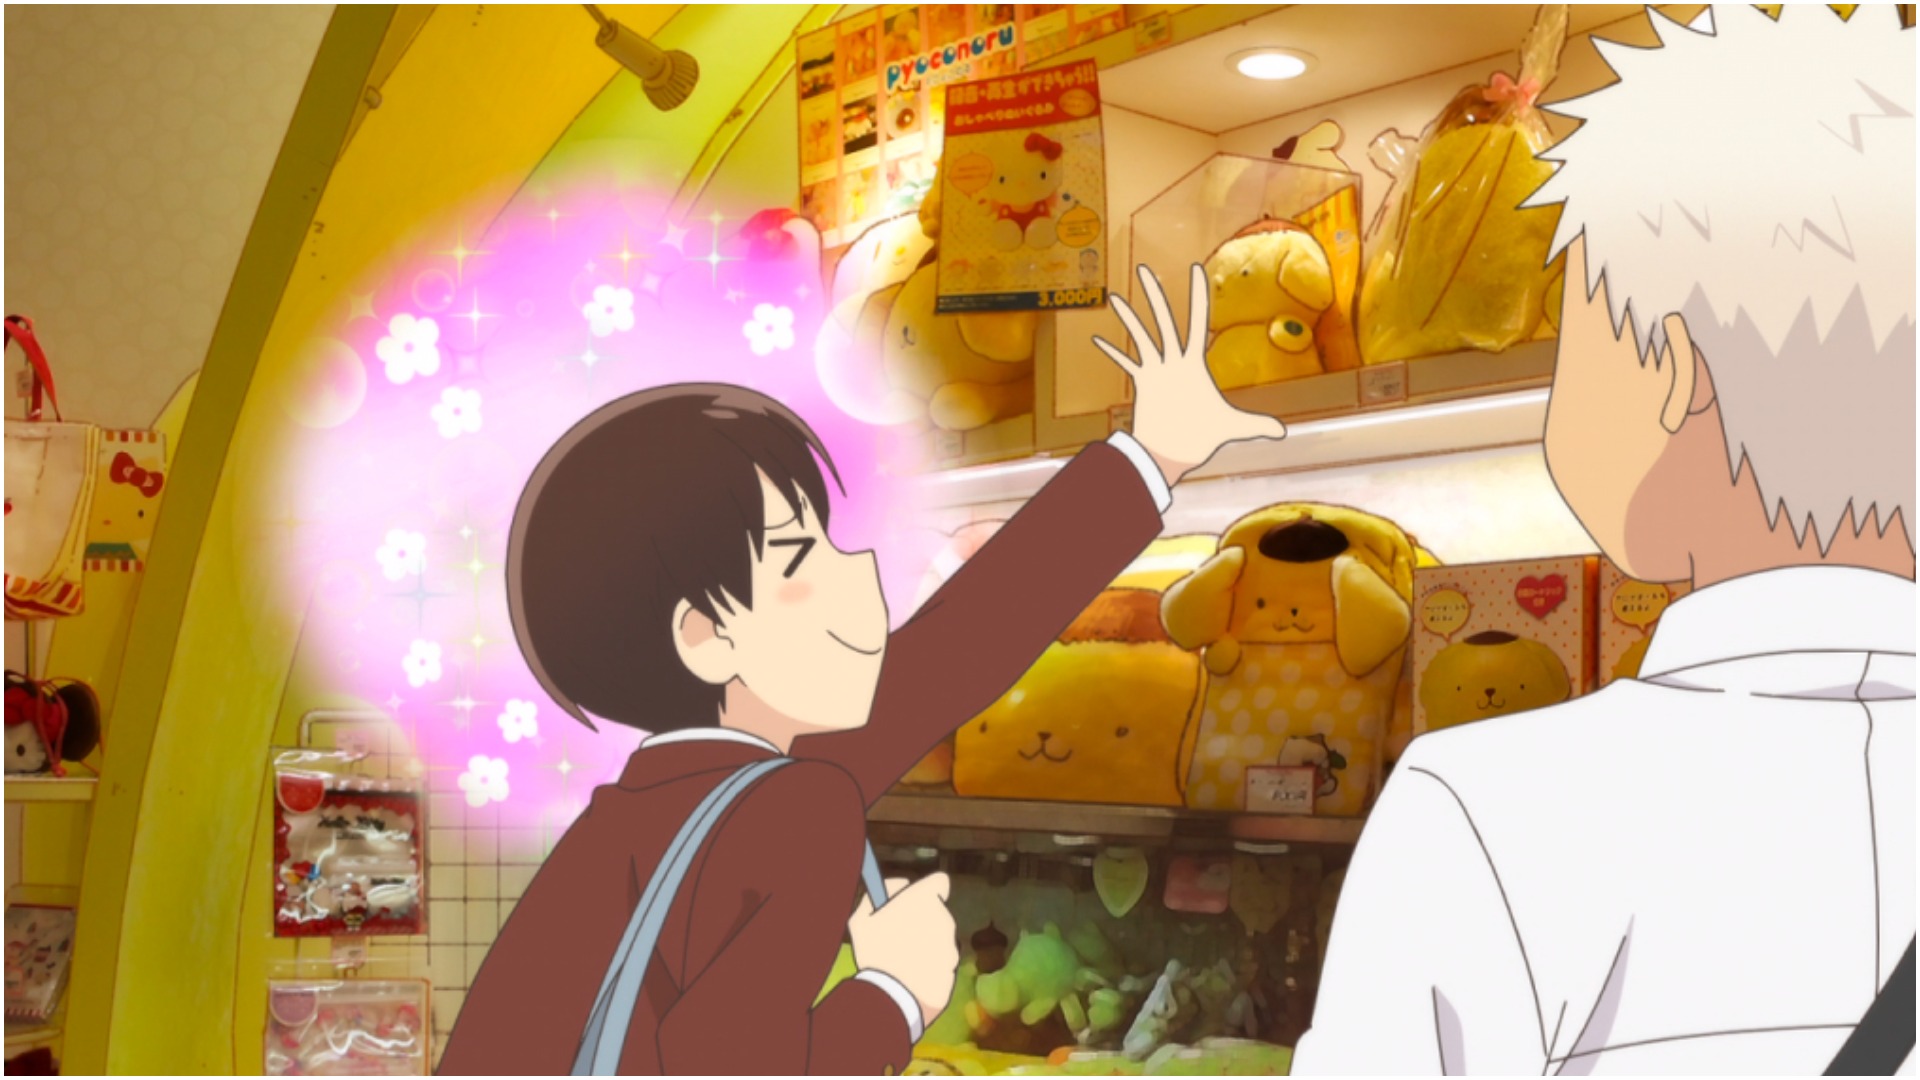 Kouta freaking out over Pompompurin